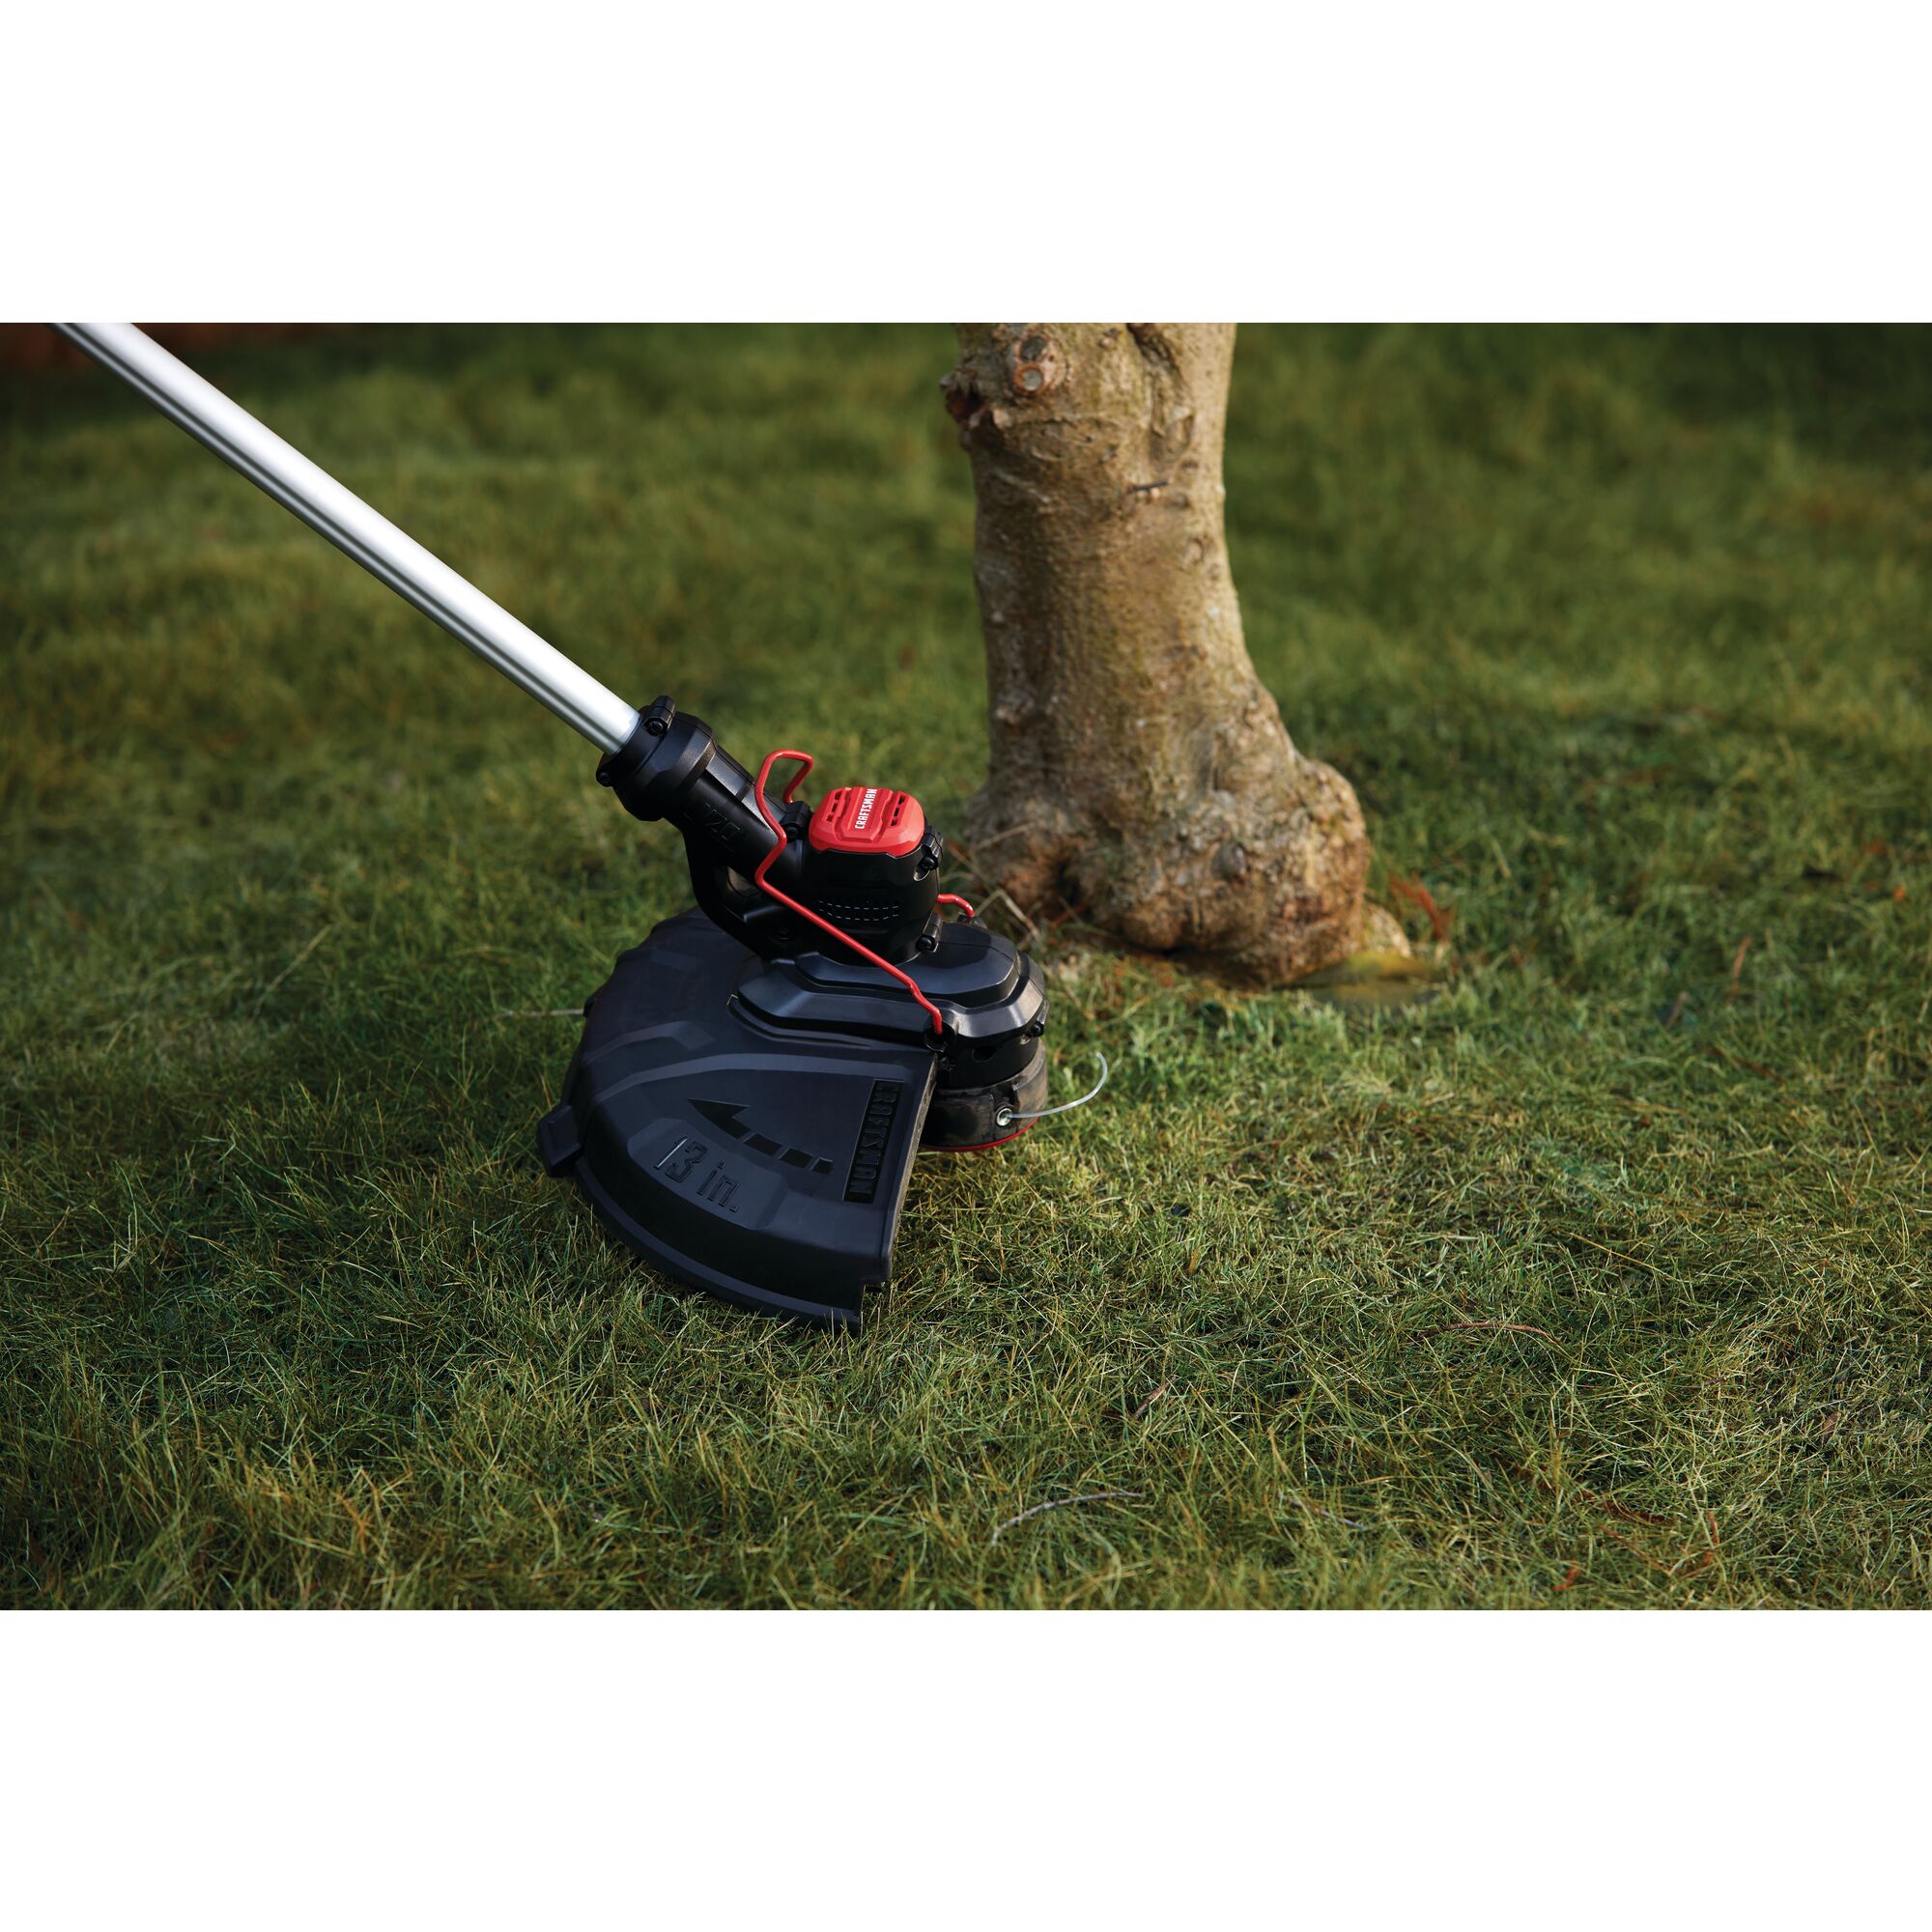 13 inch cutting swath feature of 20 volt weedwacker 13 inch cordless string trimmer and edger with automatic feed kit 2.0 ampere per hour.